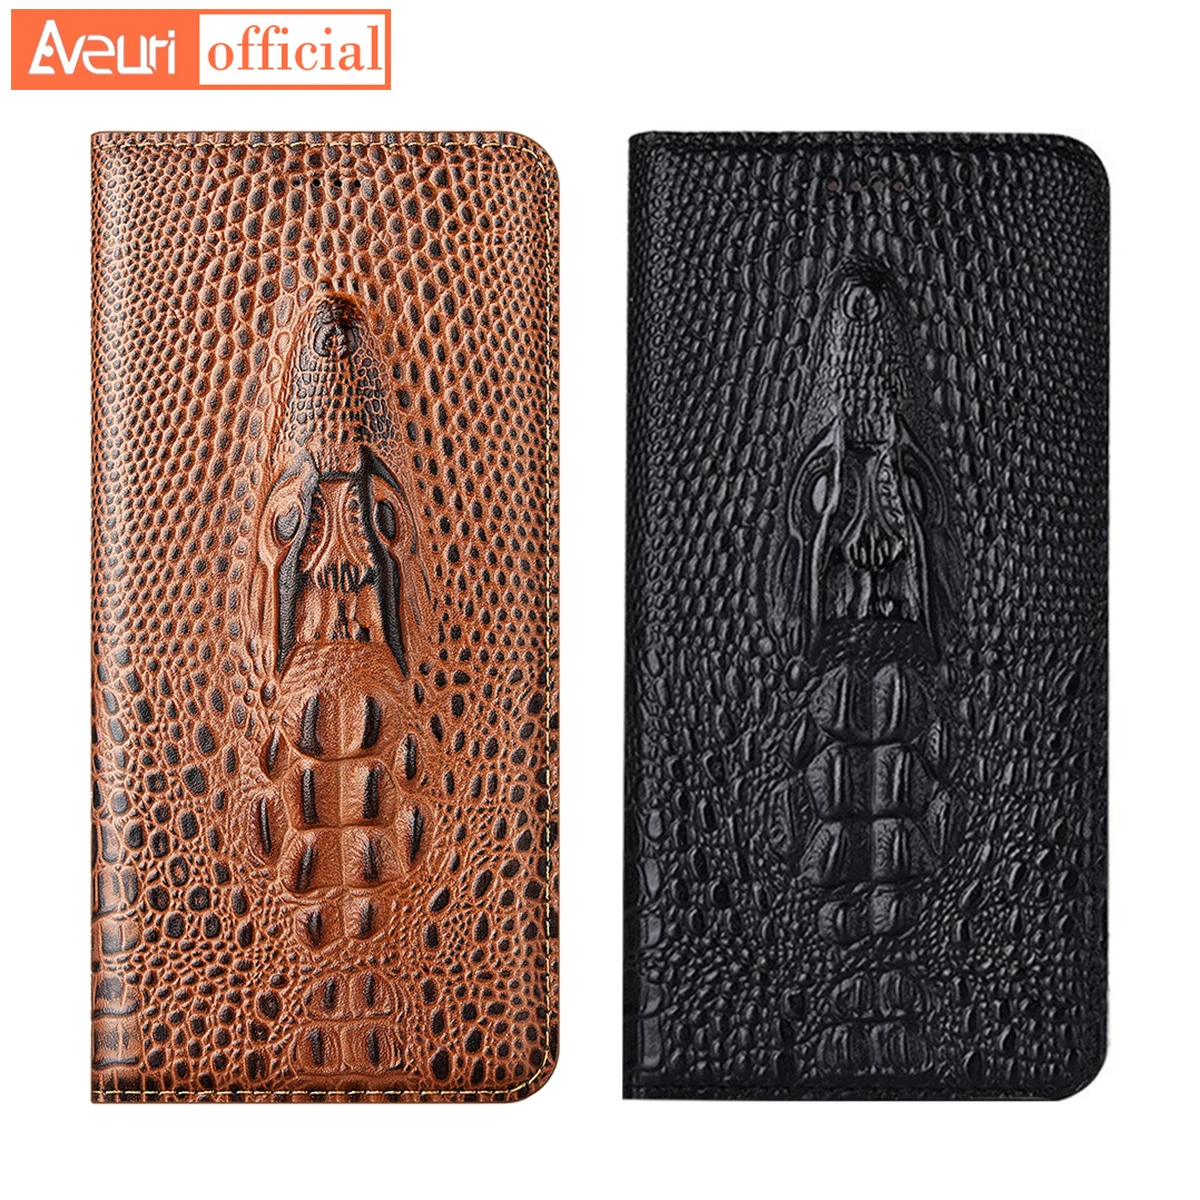 

Luxury Genuine Leather Flip Phone Case For OnePlus 11 11R 10T 9RT Nord 2T N20 SE N200 N300 5G Crocodile Style Cover Case Coque